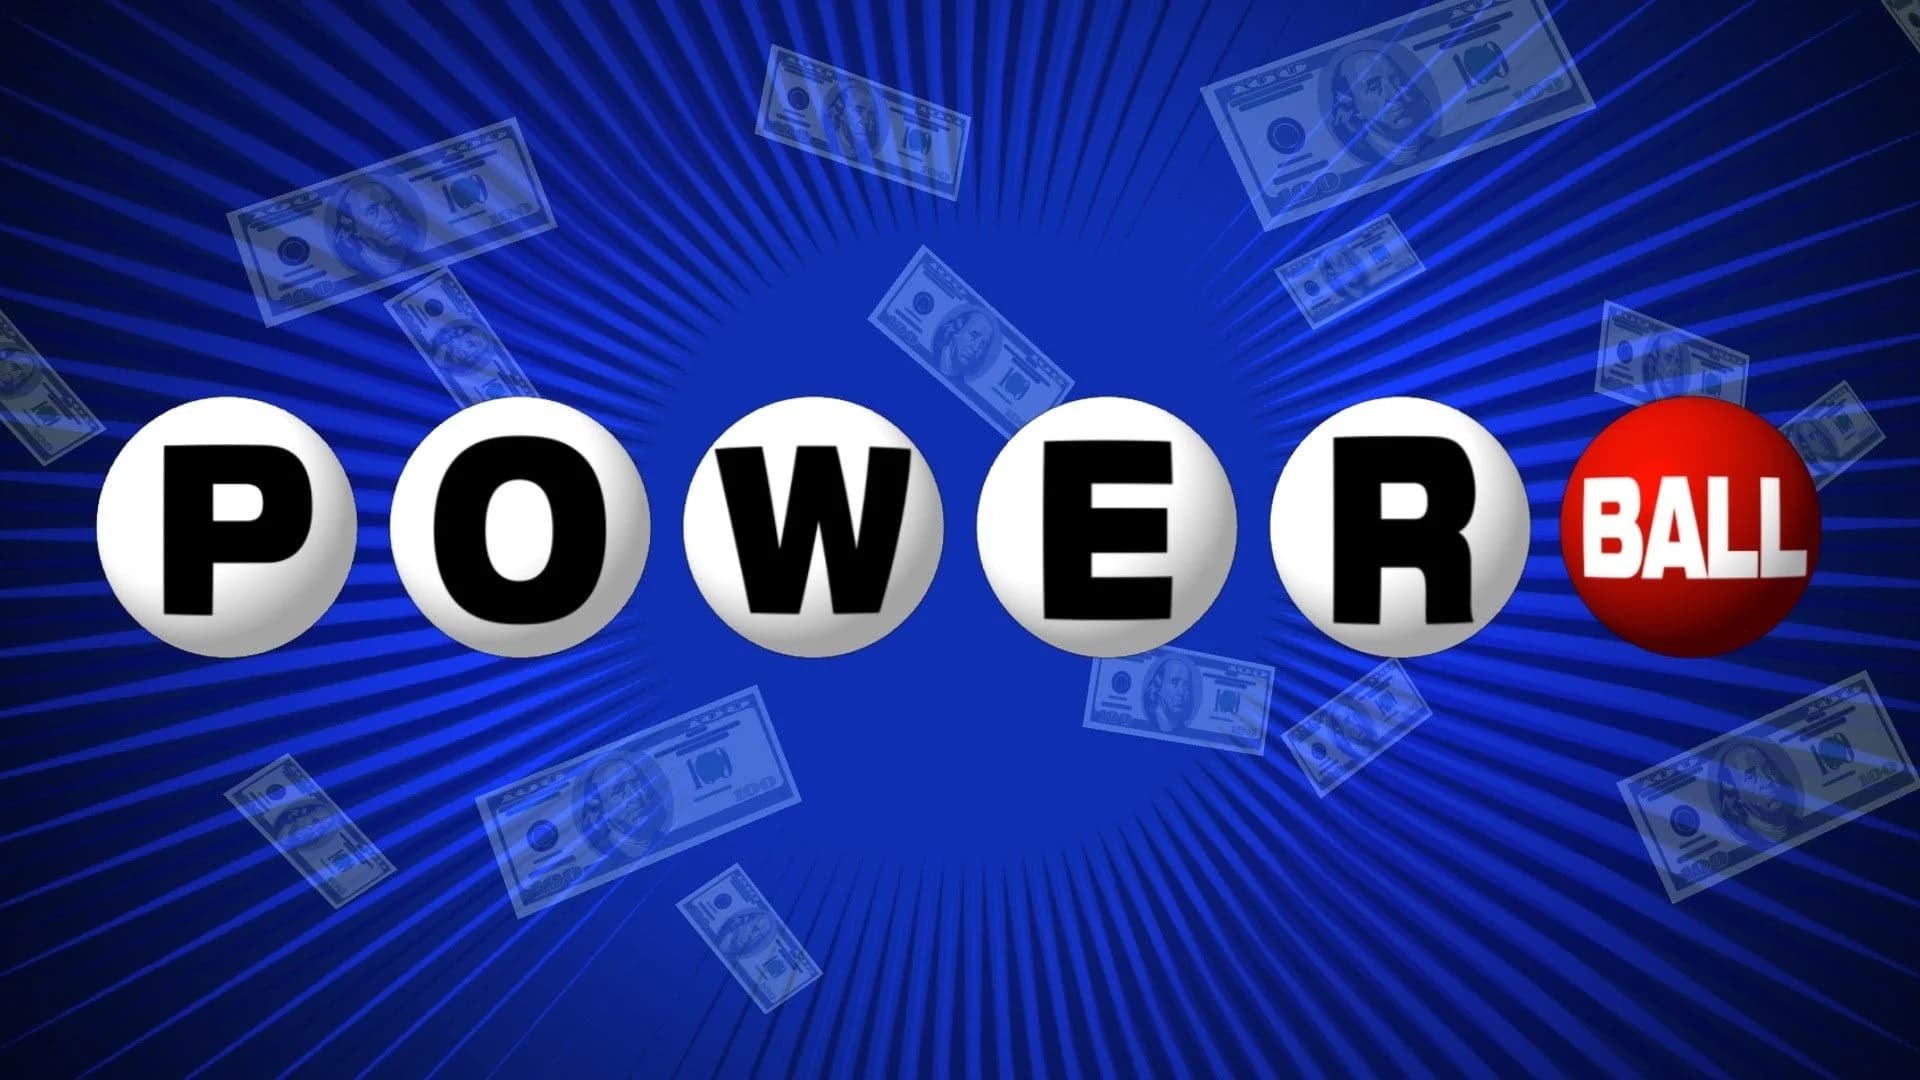 Officials announce New Jersey location that sold $1 million Powerball ticket